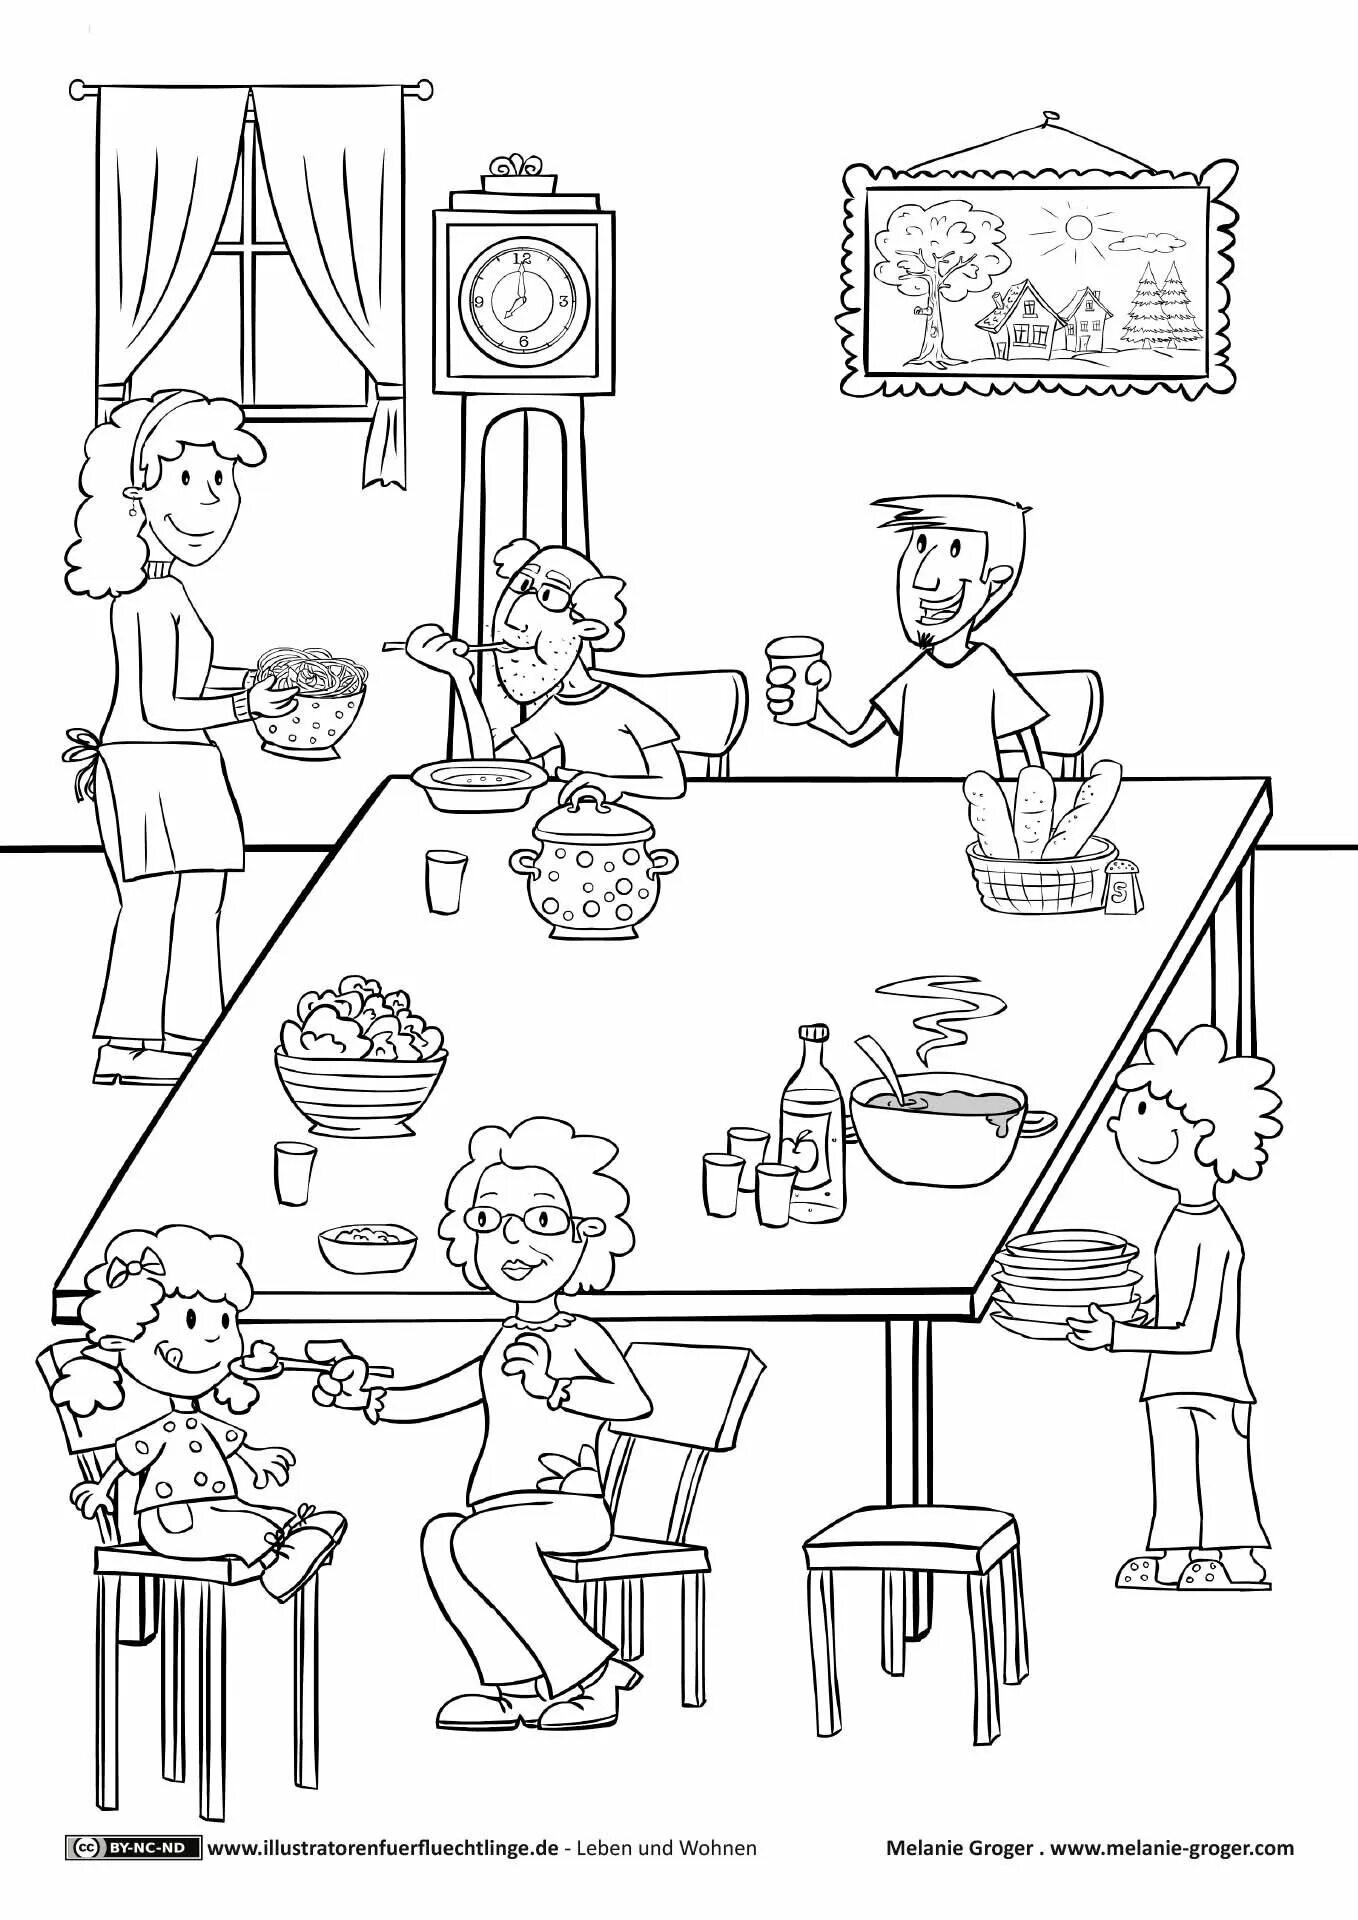 Creative dining room coloring book